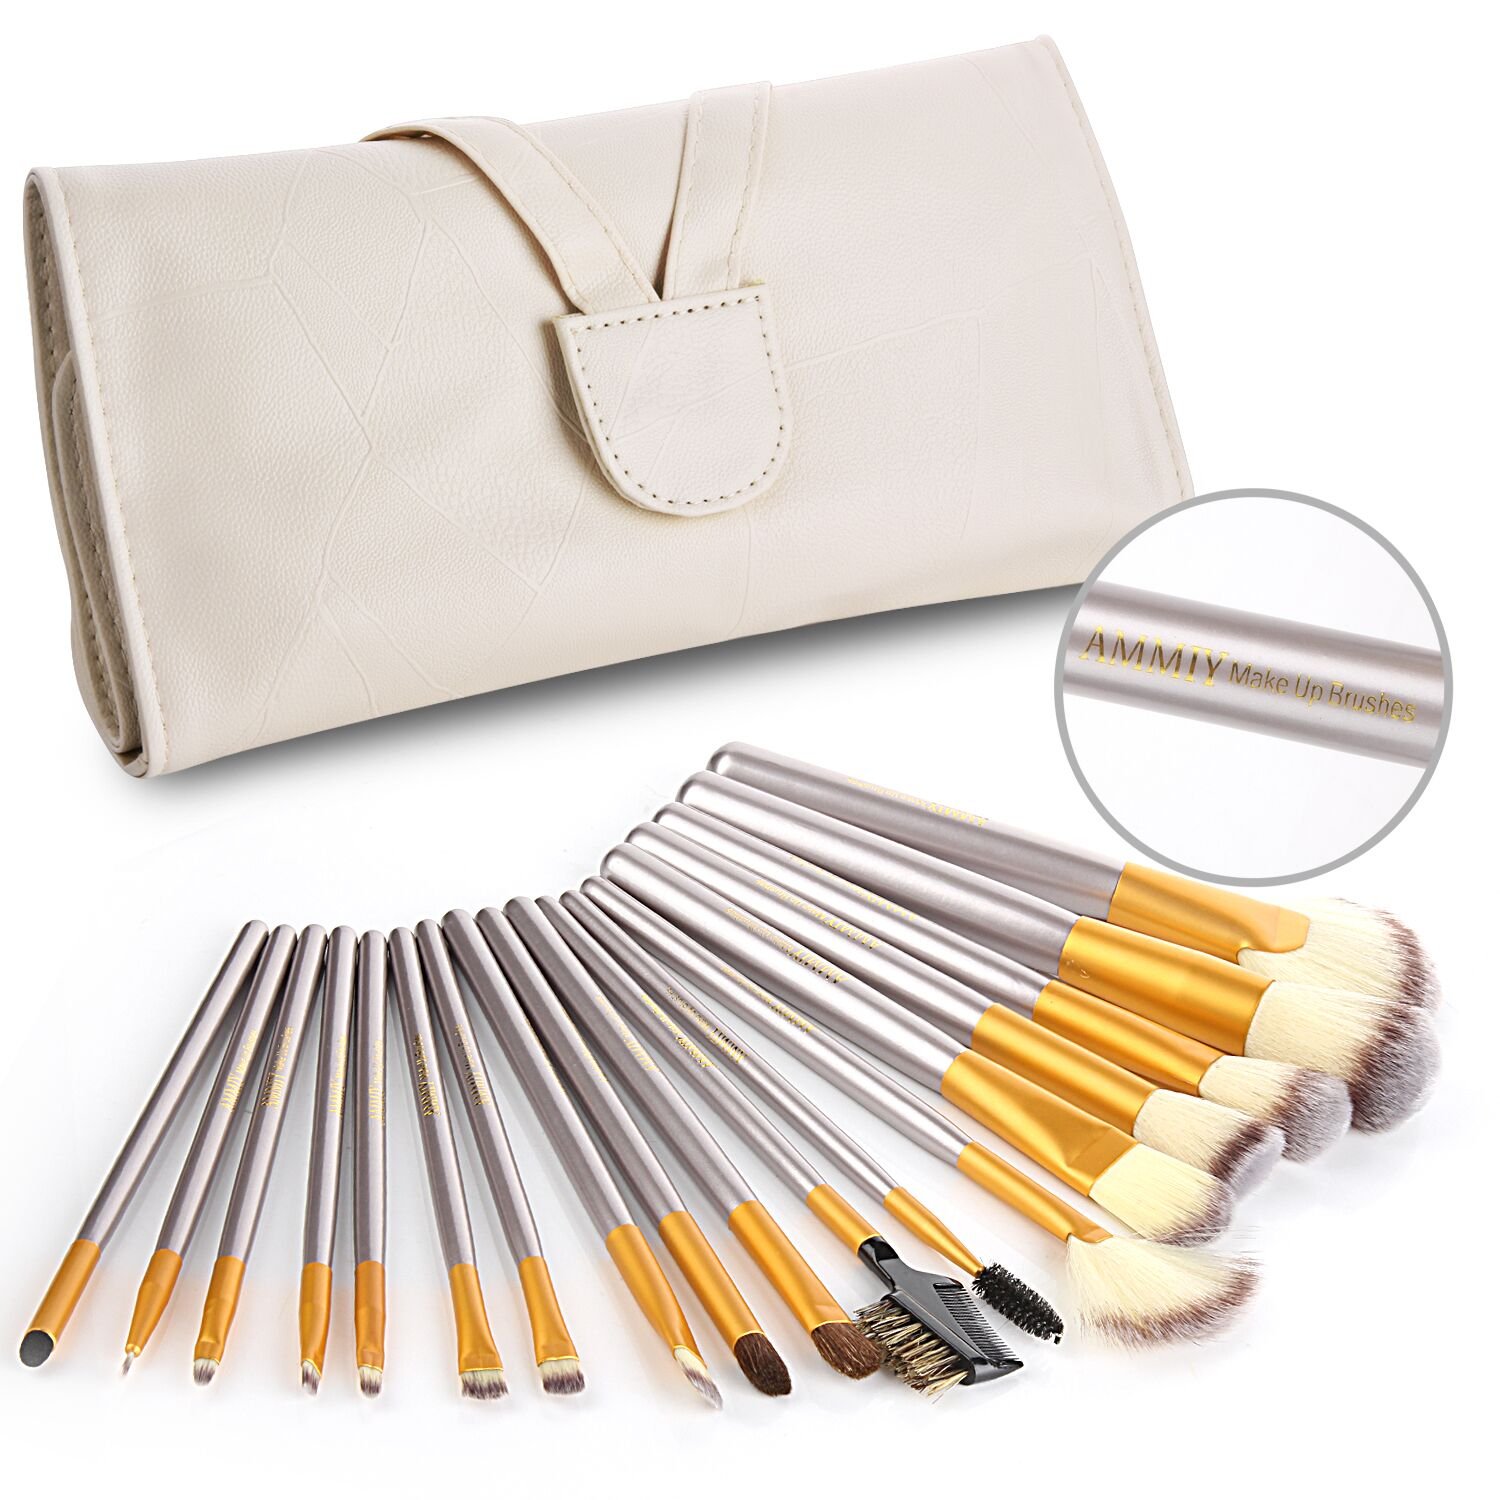 AMMIY Makeup Brushes 18 PCs Makeup Brush Set Professional Wood Handle Premium Synthetic Contour Concealers Foundation Blending Face Powder Eye shadow Cosmetic Brushes with PU Leather Bag (Champagne)